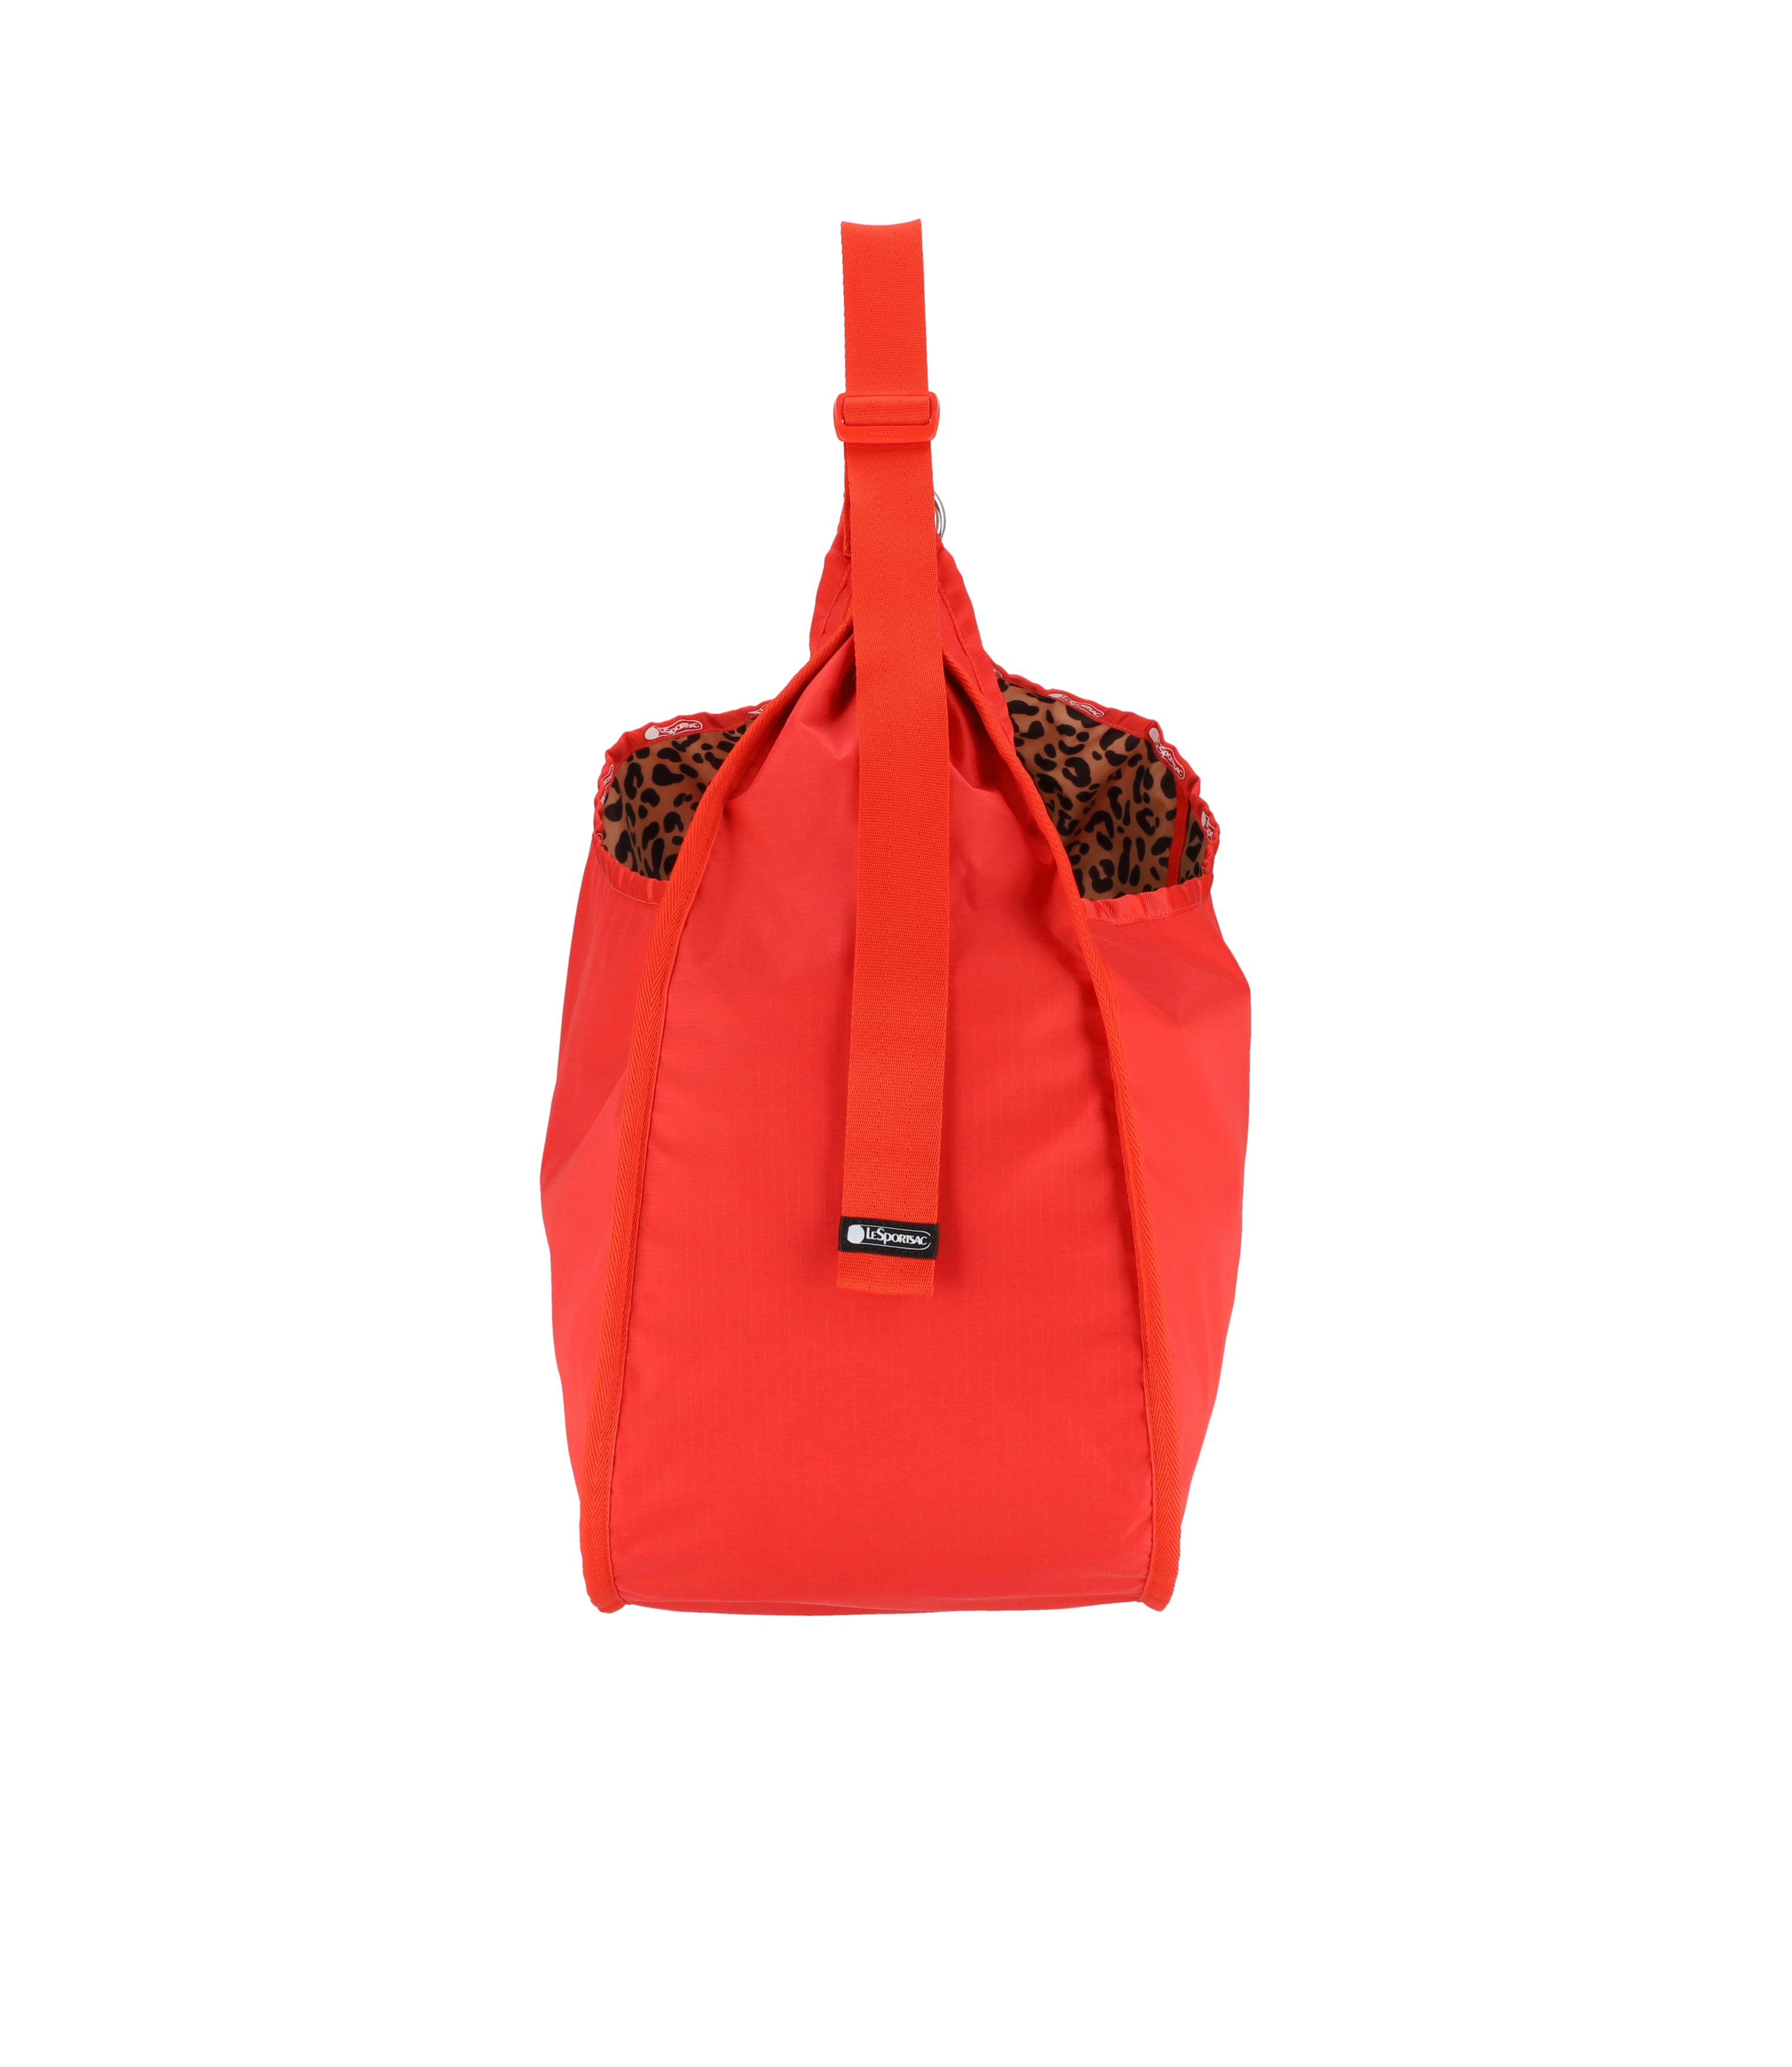 Extra Large Sportsac - Yowie Red – LeSportsac